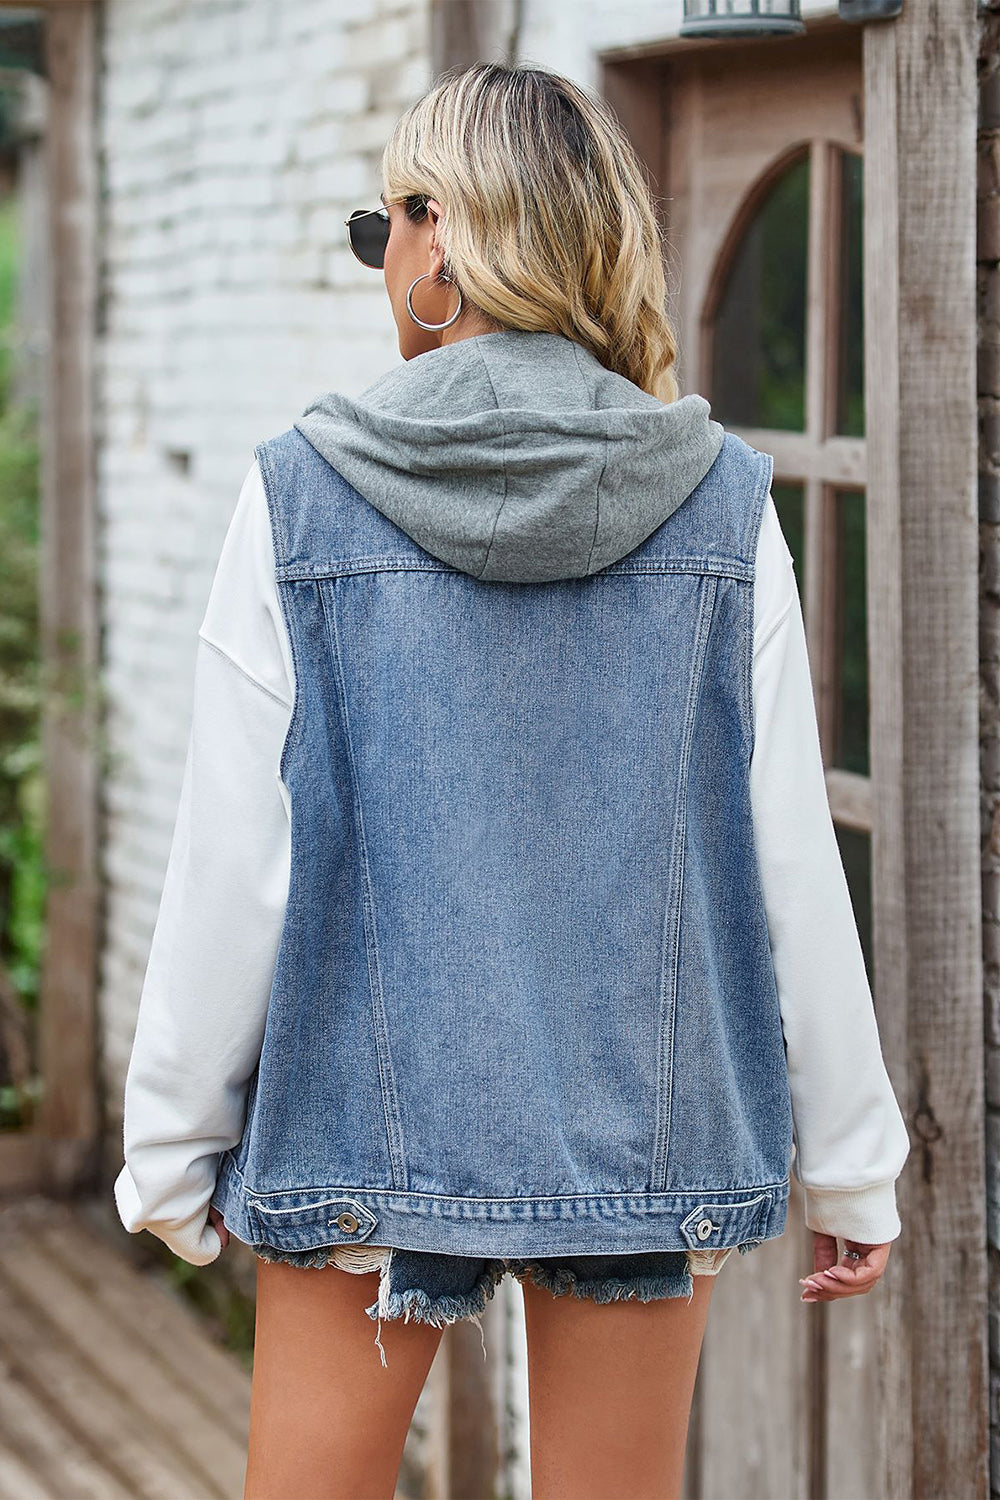 Light Slate Gray Sleeveless Hooded Denim Jacket with Pockets Sentient Beauty Fashions Apparel & Accessories